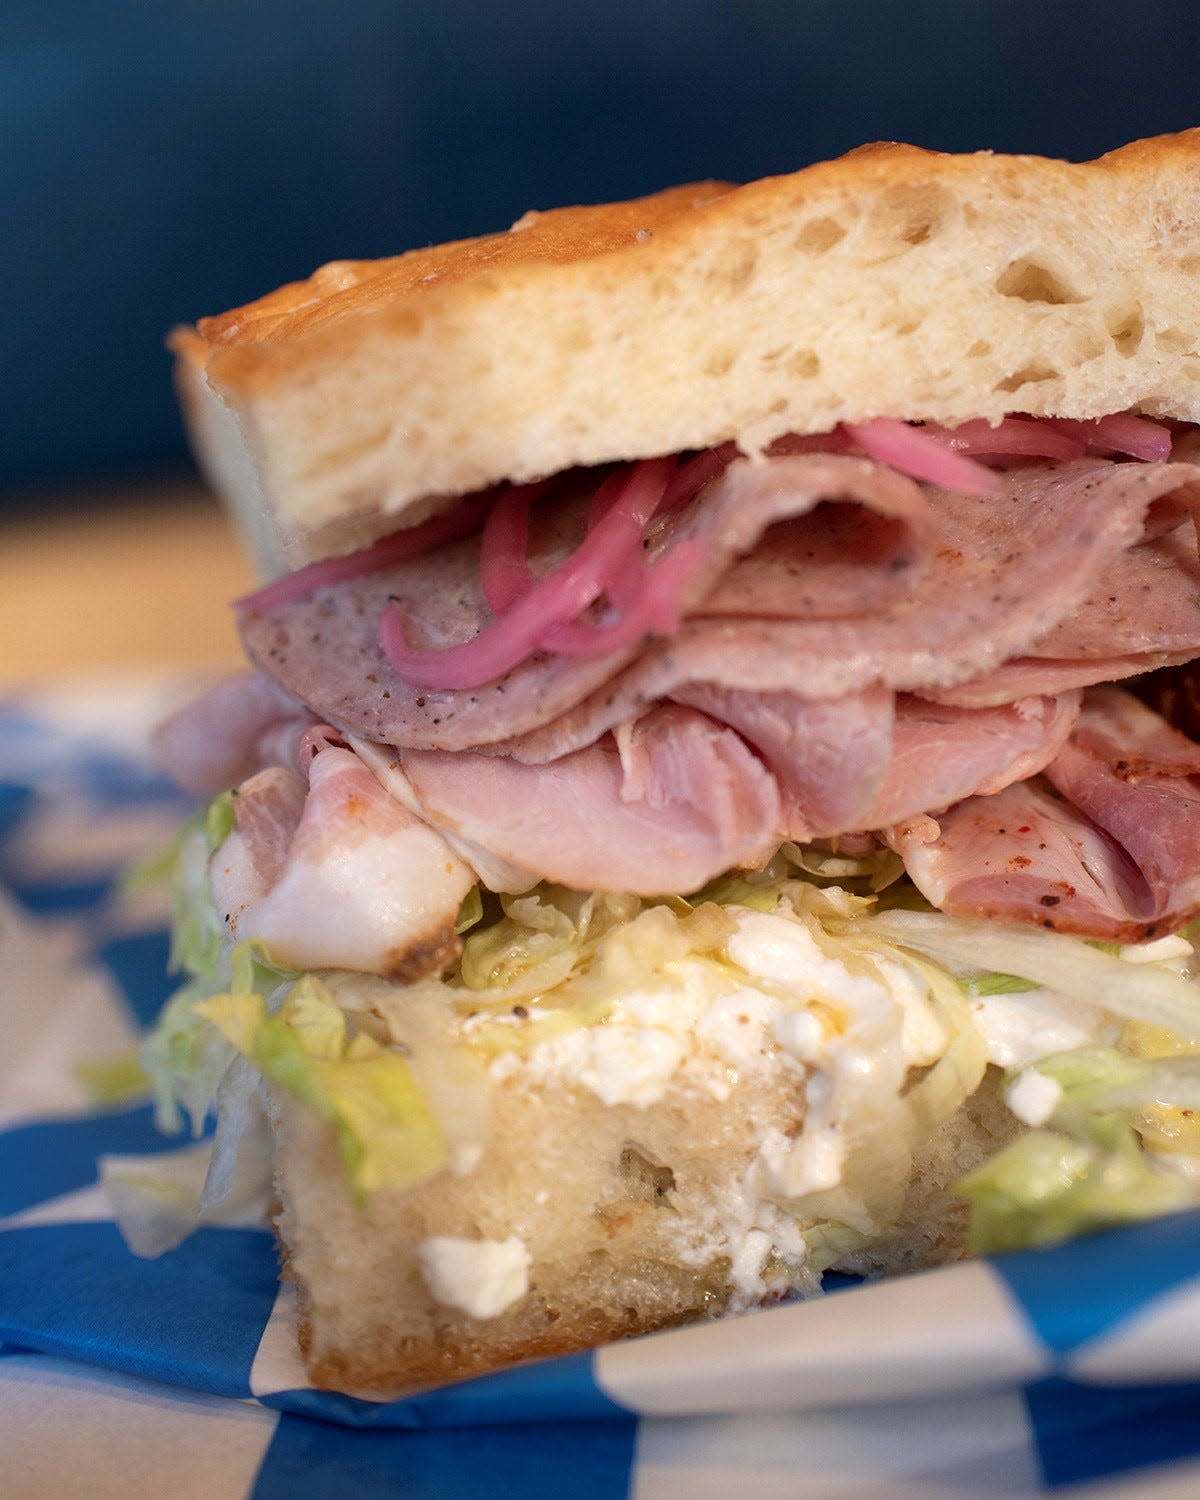 The New Deal Italian sandwich from Young Buck Deli.